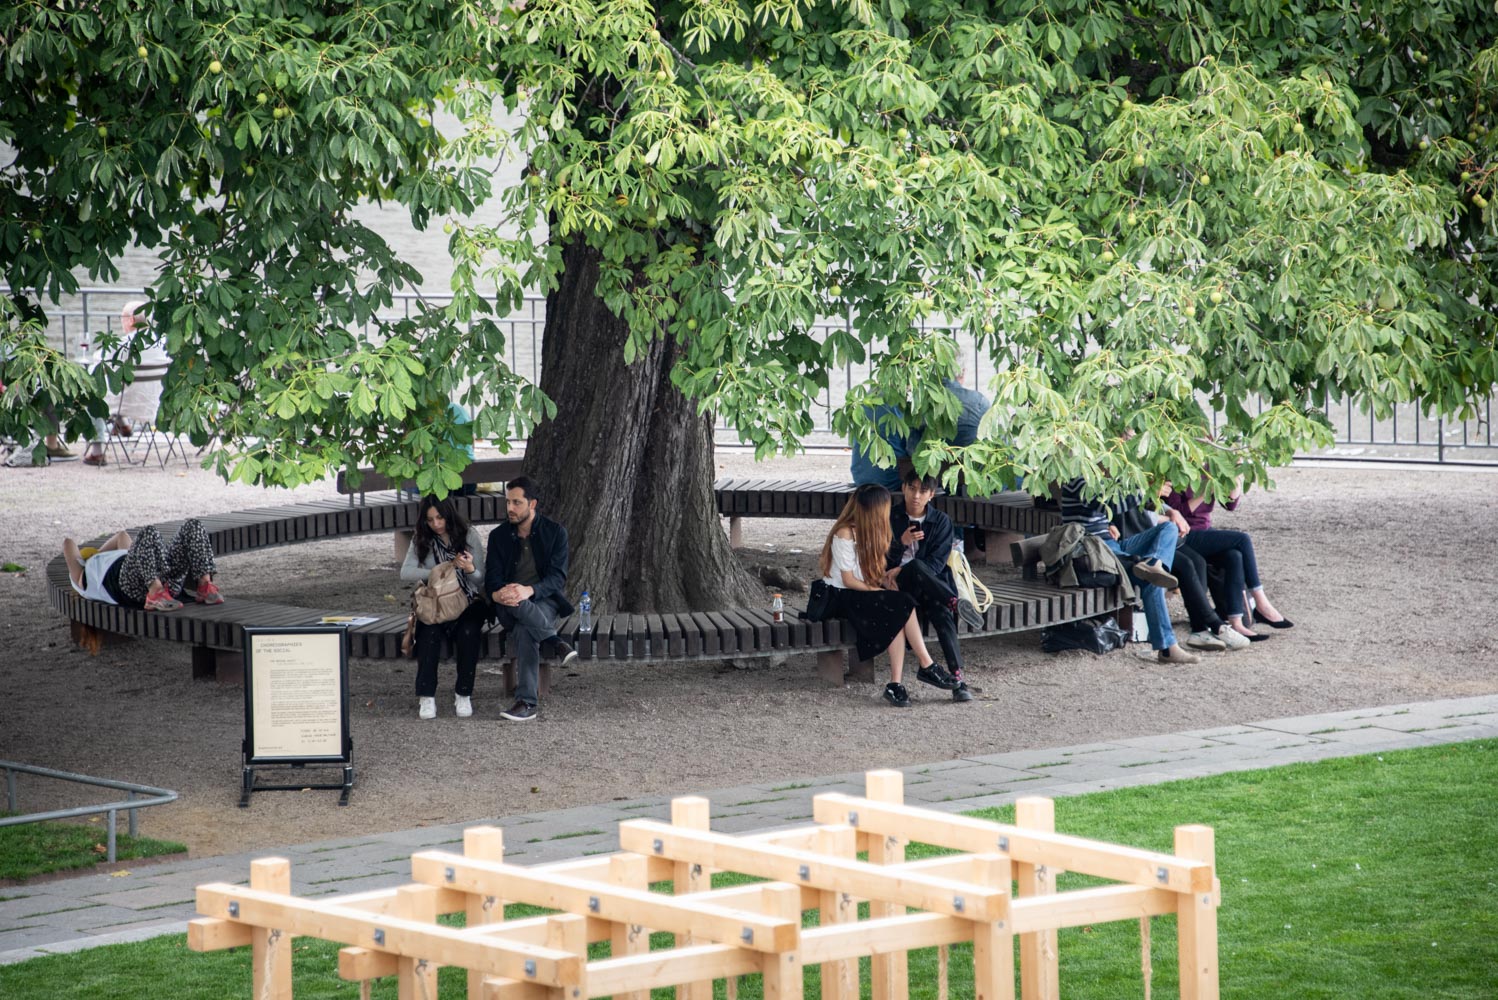 People in a park, sitting next to a large tree. In the forefront a tree construction.